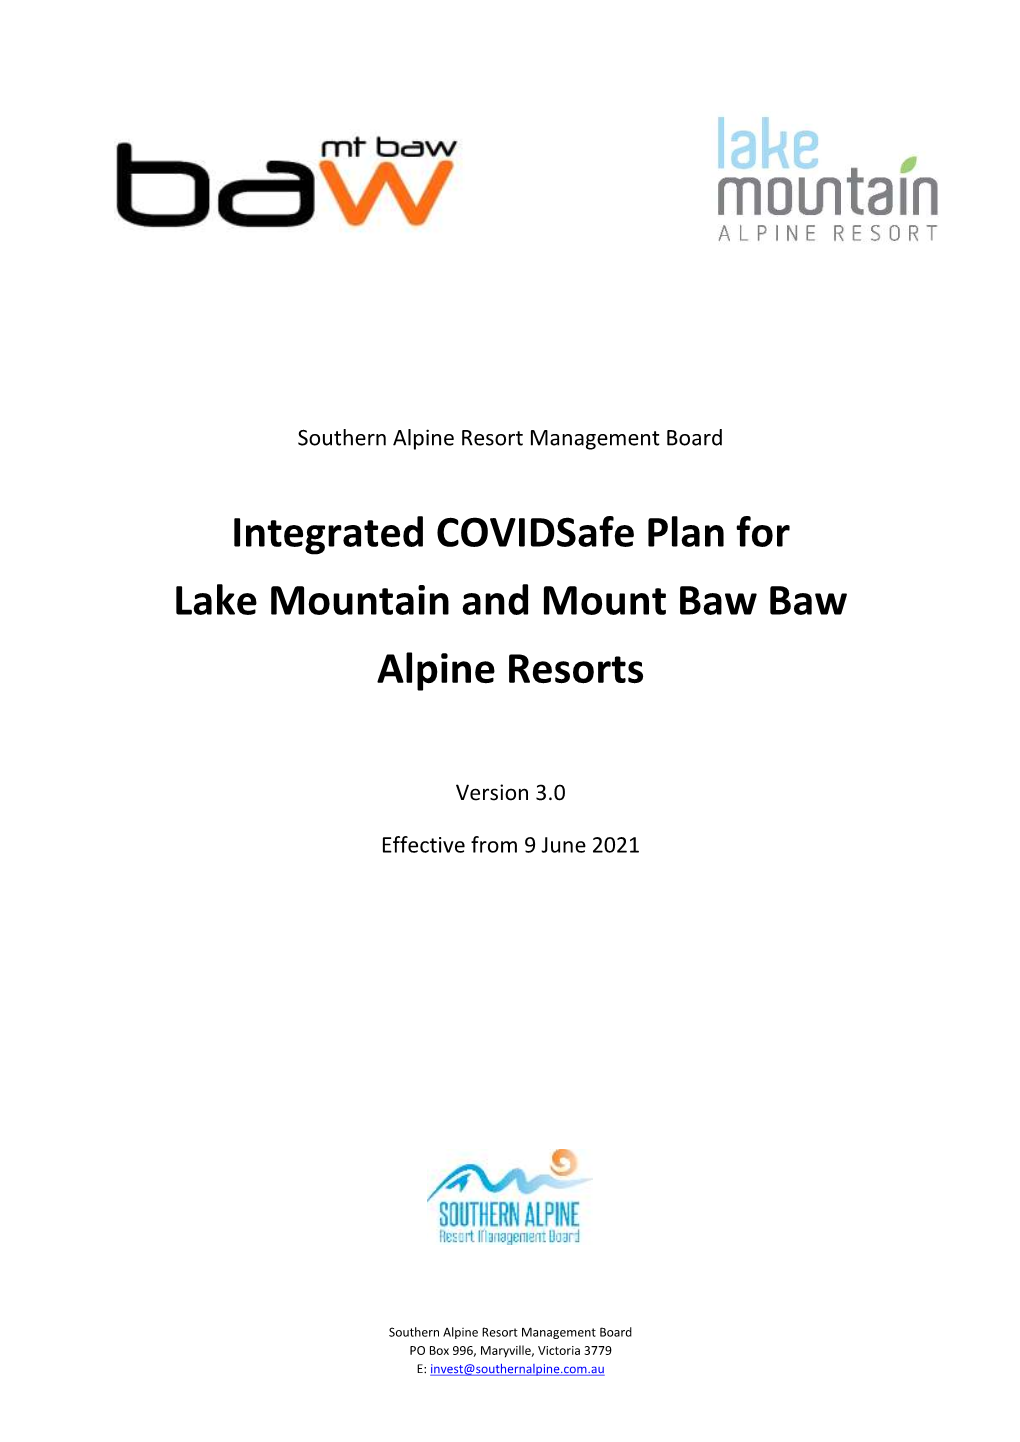 Integrated Covidsafe Plan for Lake Mountain and Mount Baw Baw Alpine Resorts